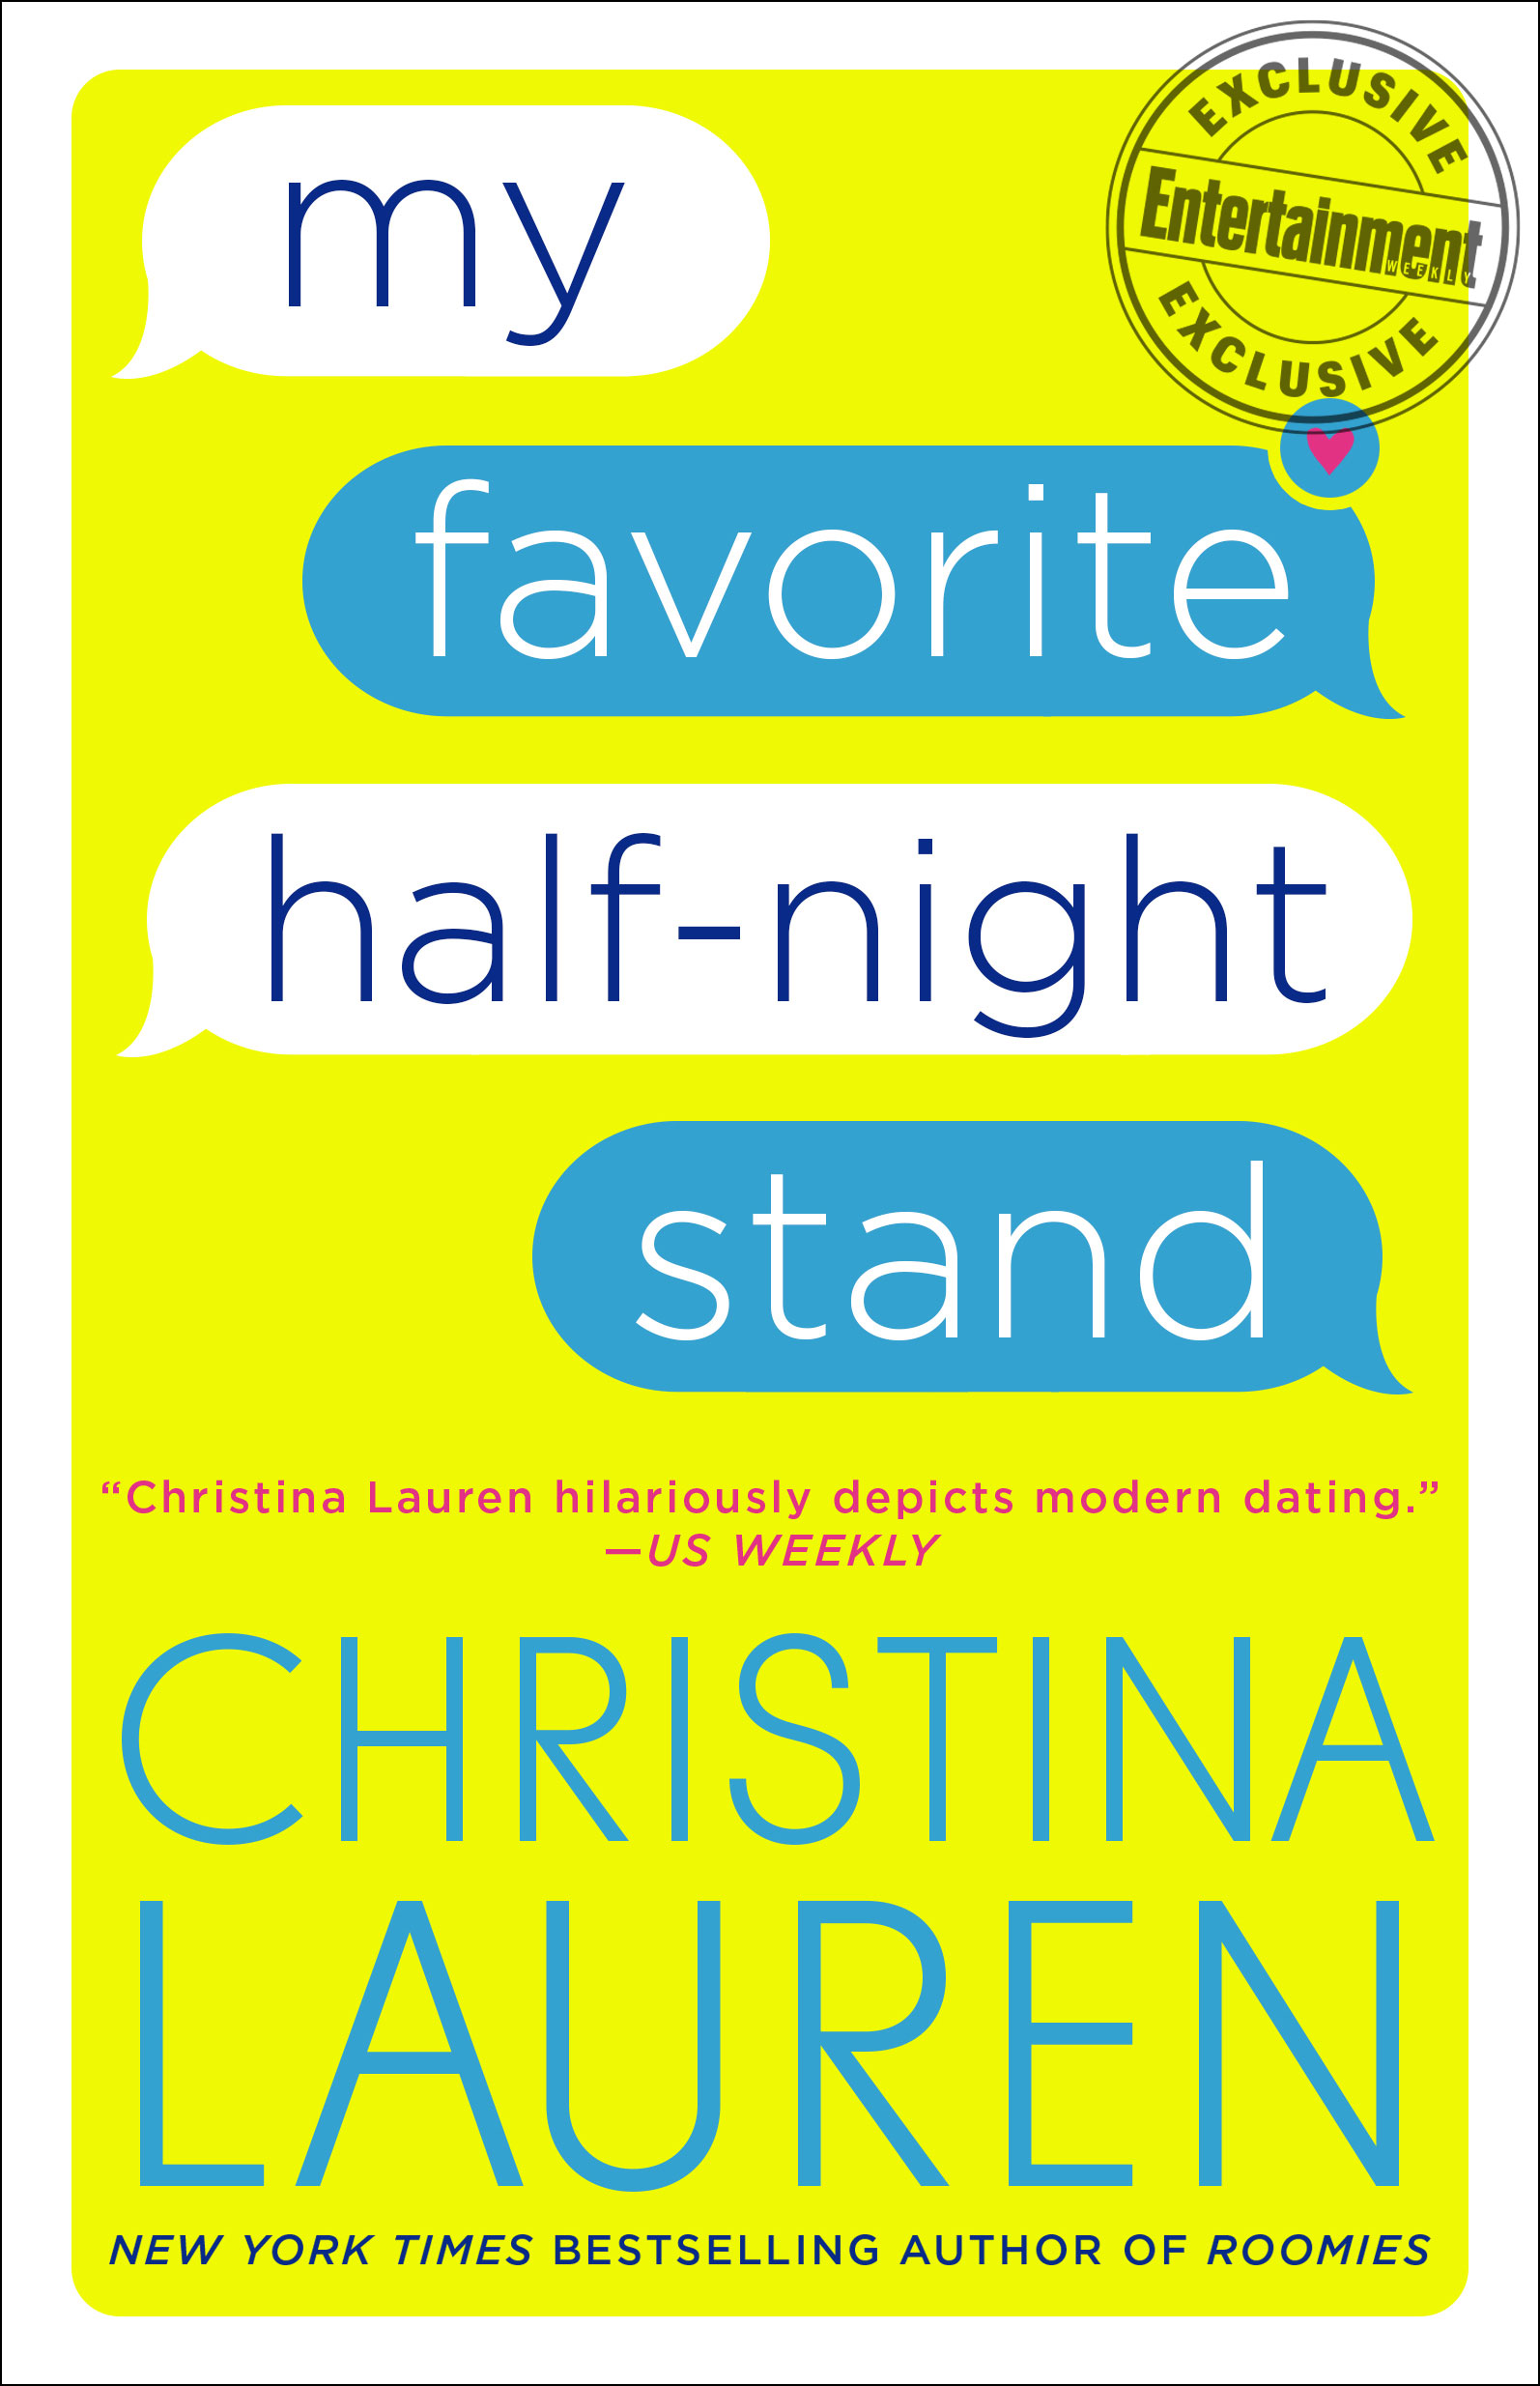 Cover Reveal: My Favorite Half-Night Stand by Christina Lauren